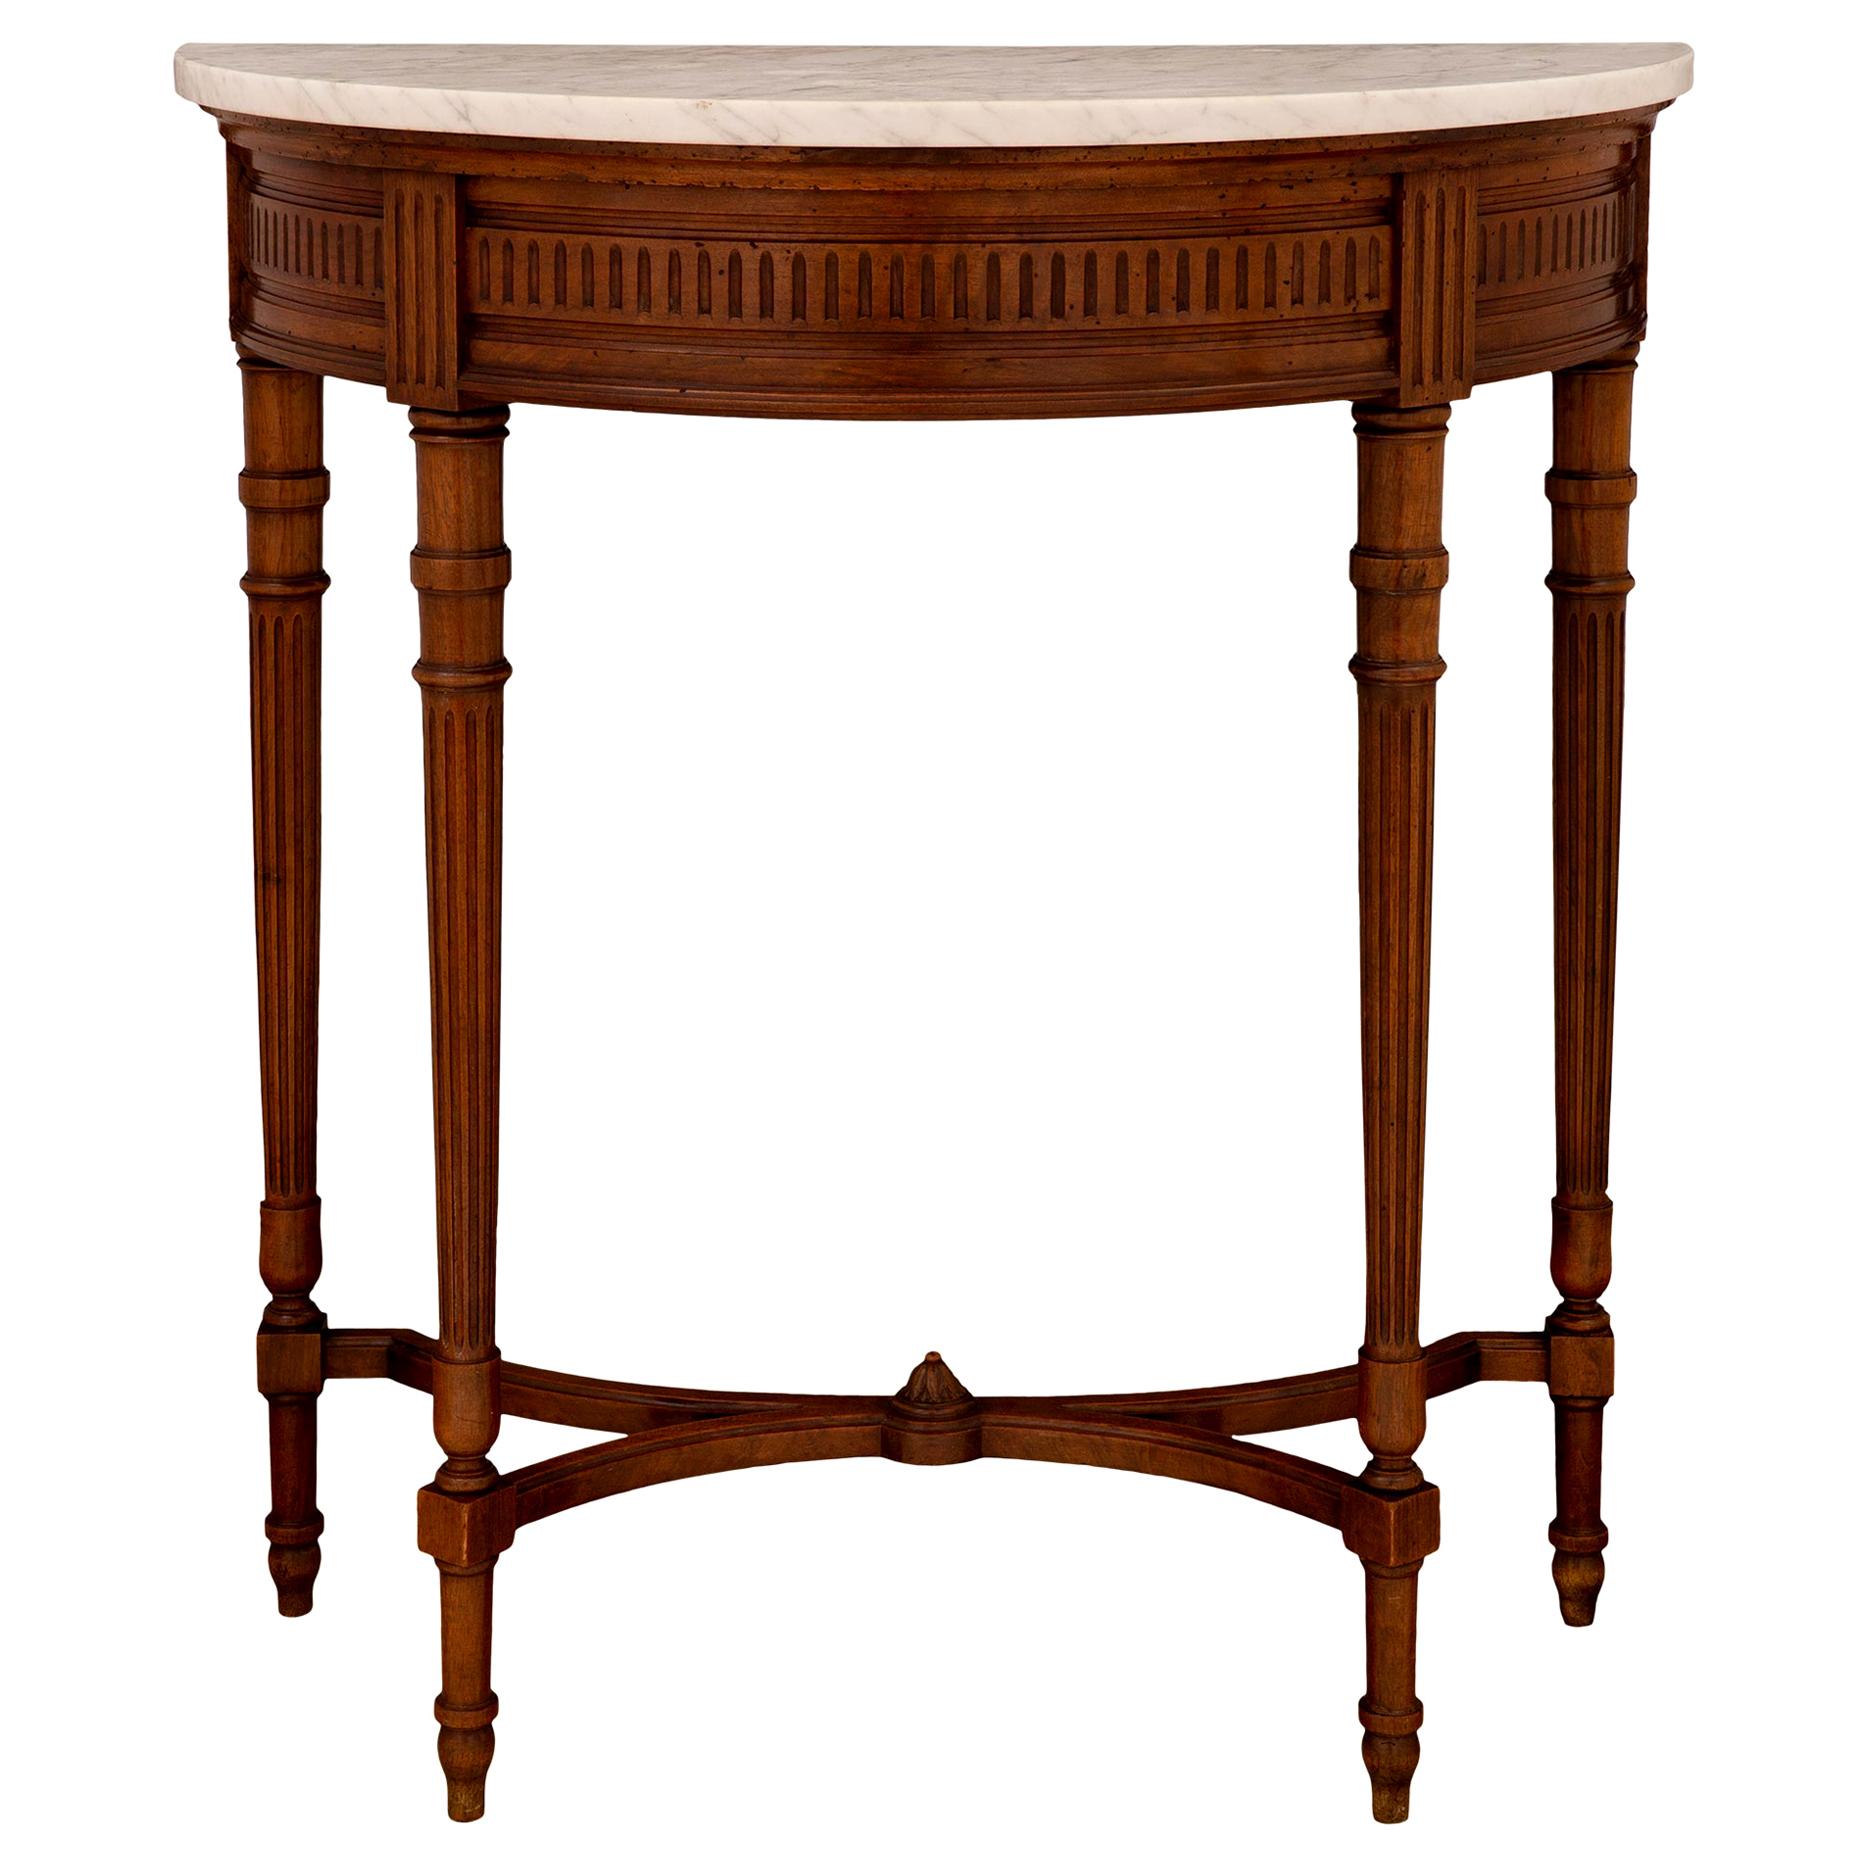 French 19th Century Louis XVI Style Walnut and Marble Demilune Console